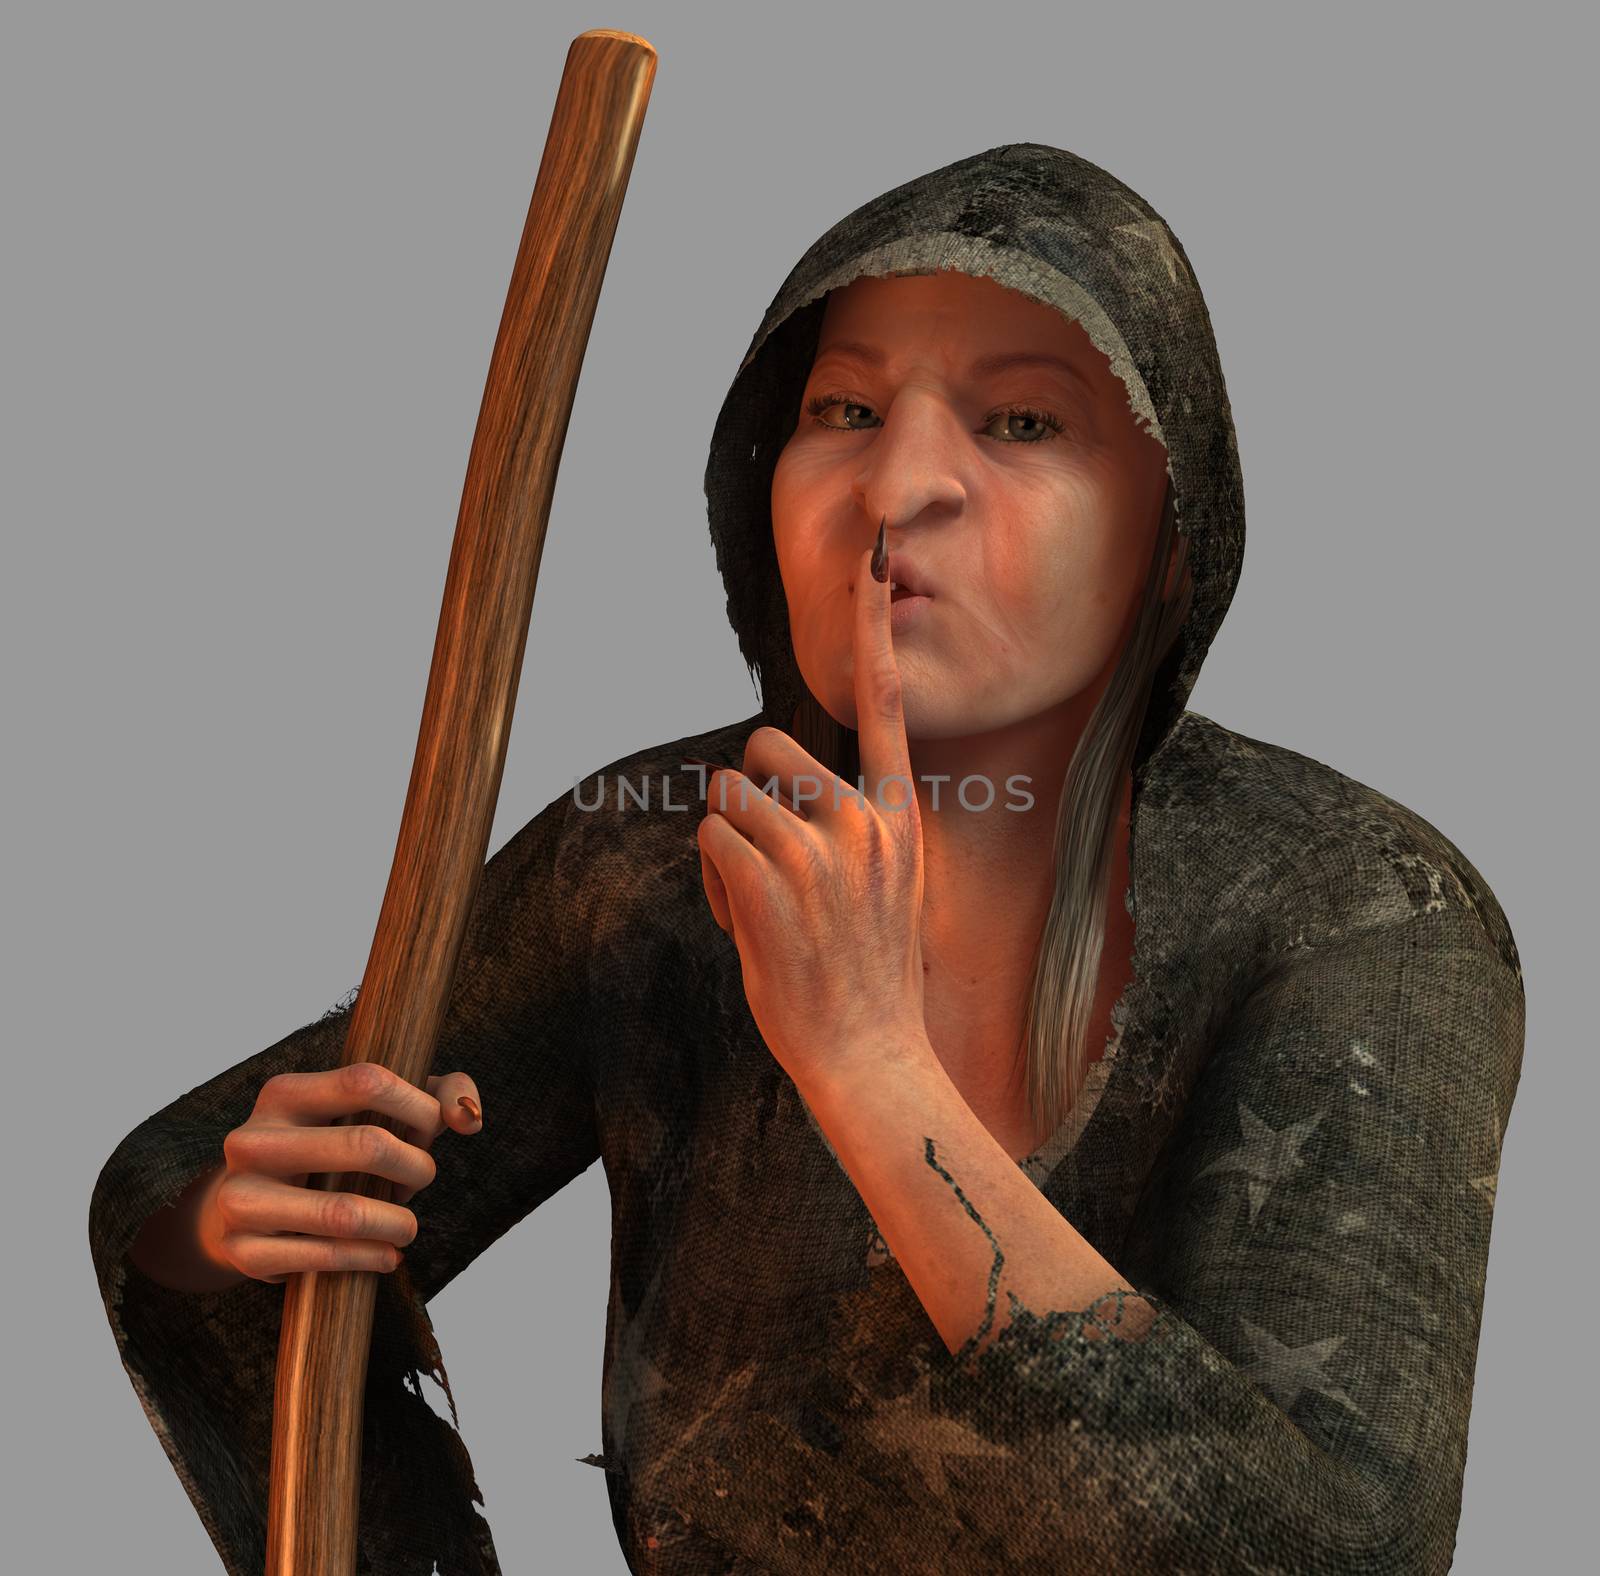 The old witch render isolated from the background